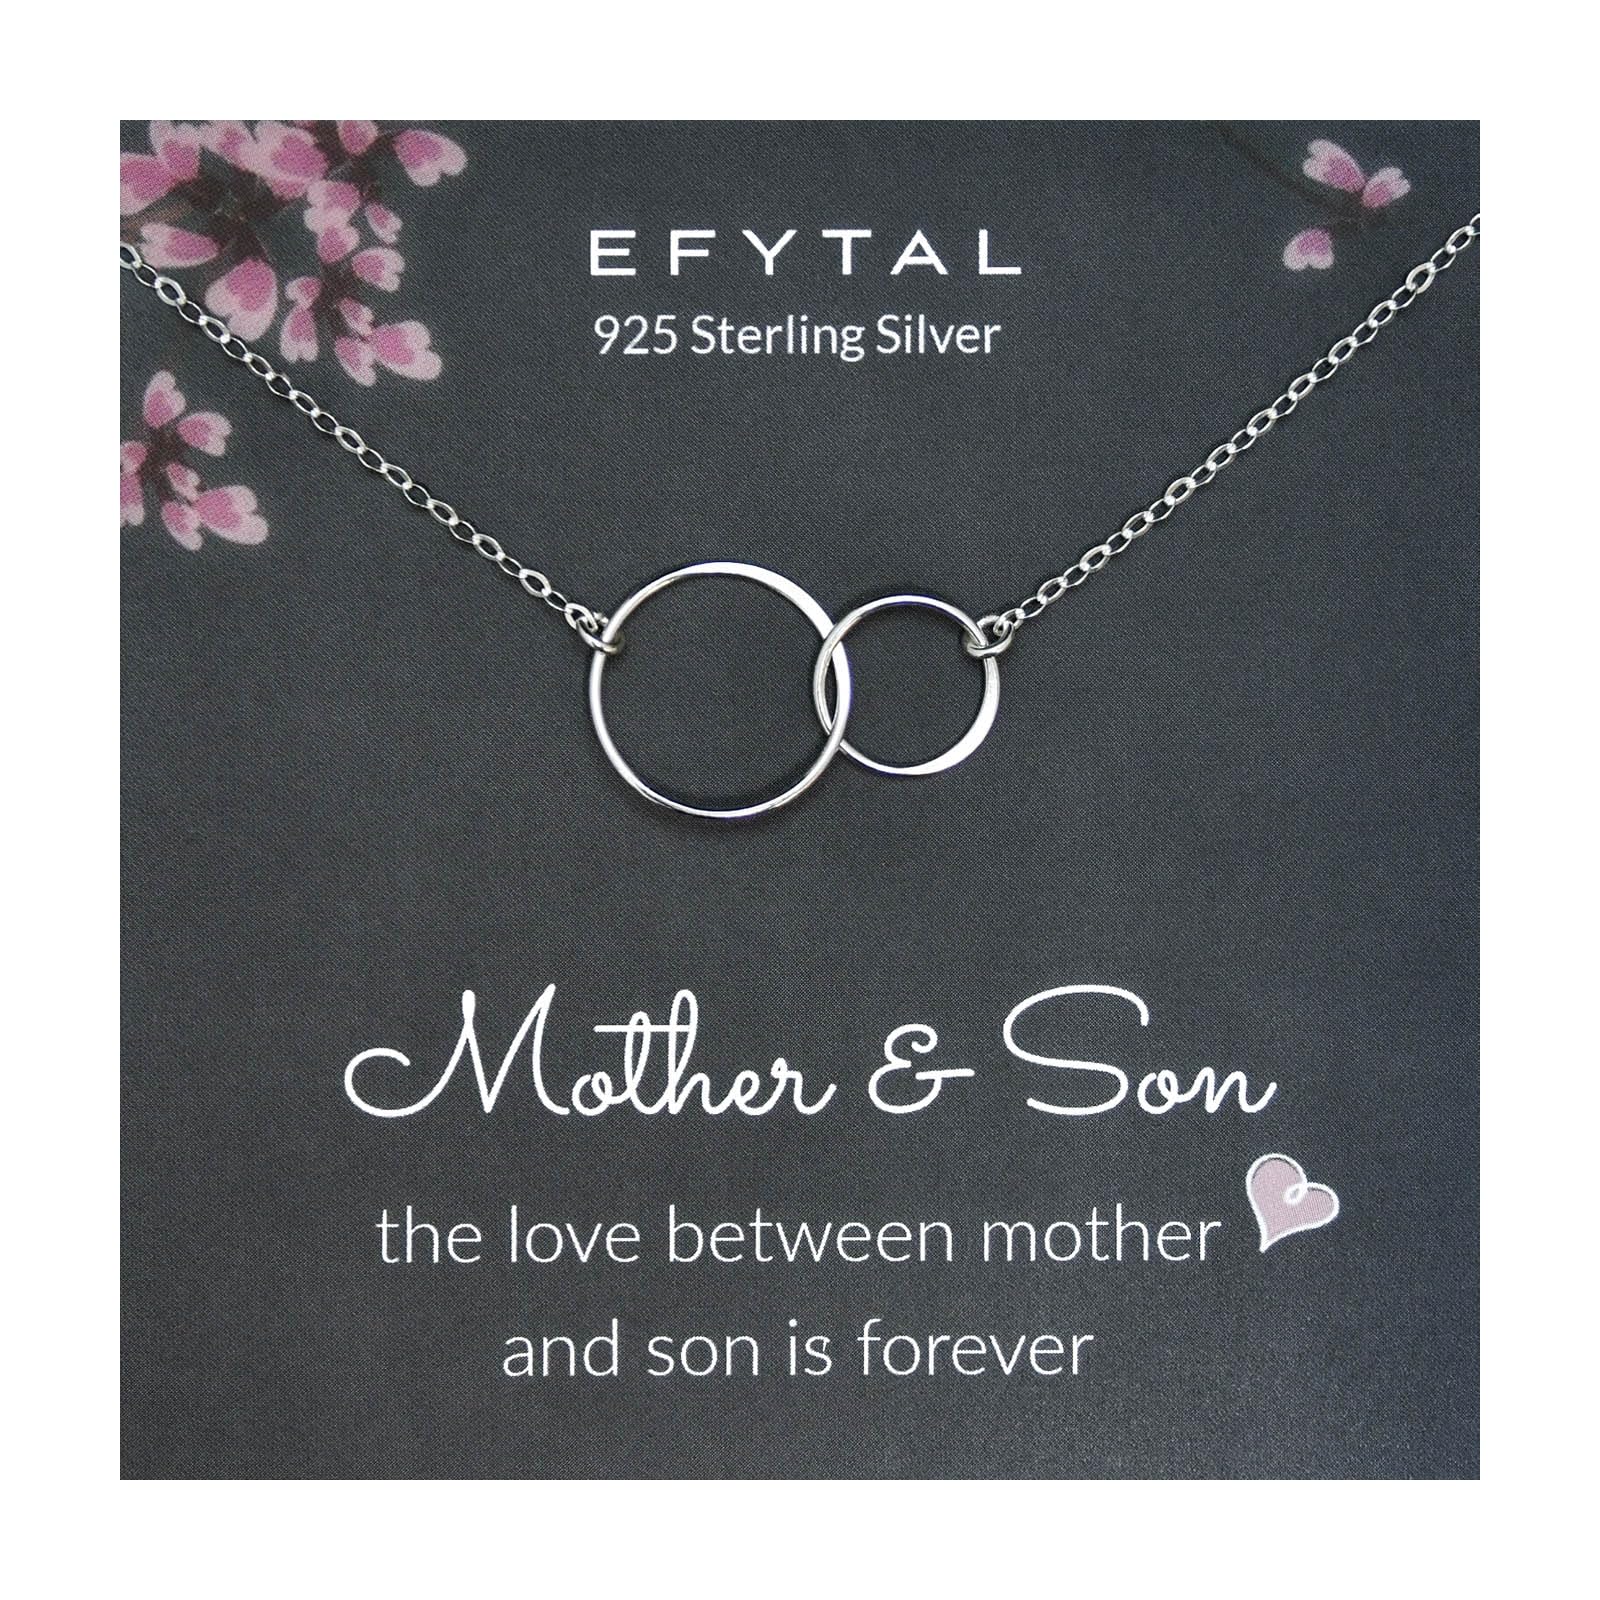 EFYTAL Mothers Day Gifts From Son, Mother Son Necklace, 925 Sterling Silver Necklace, First Mothers Day Gifts, New Mom Gifts for Women, Mom and Son Necklace, Mothers Day Necklace